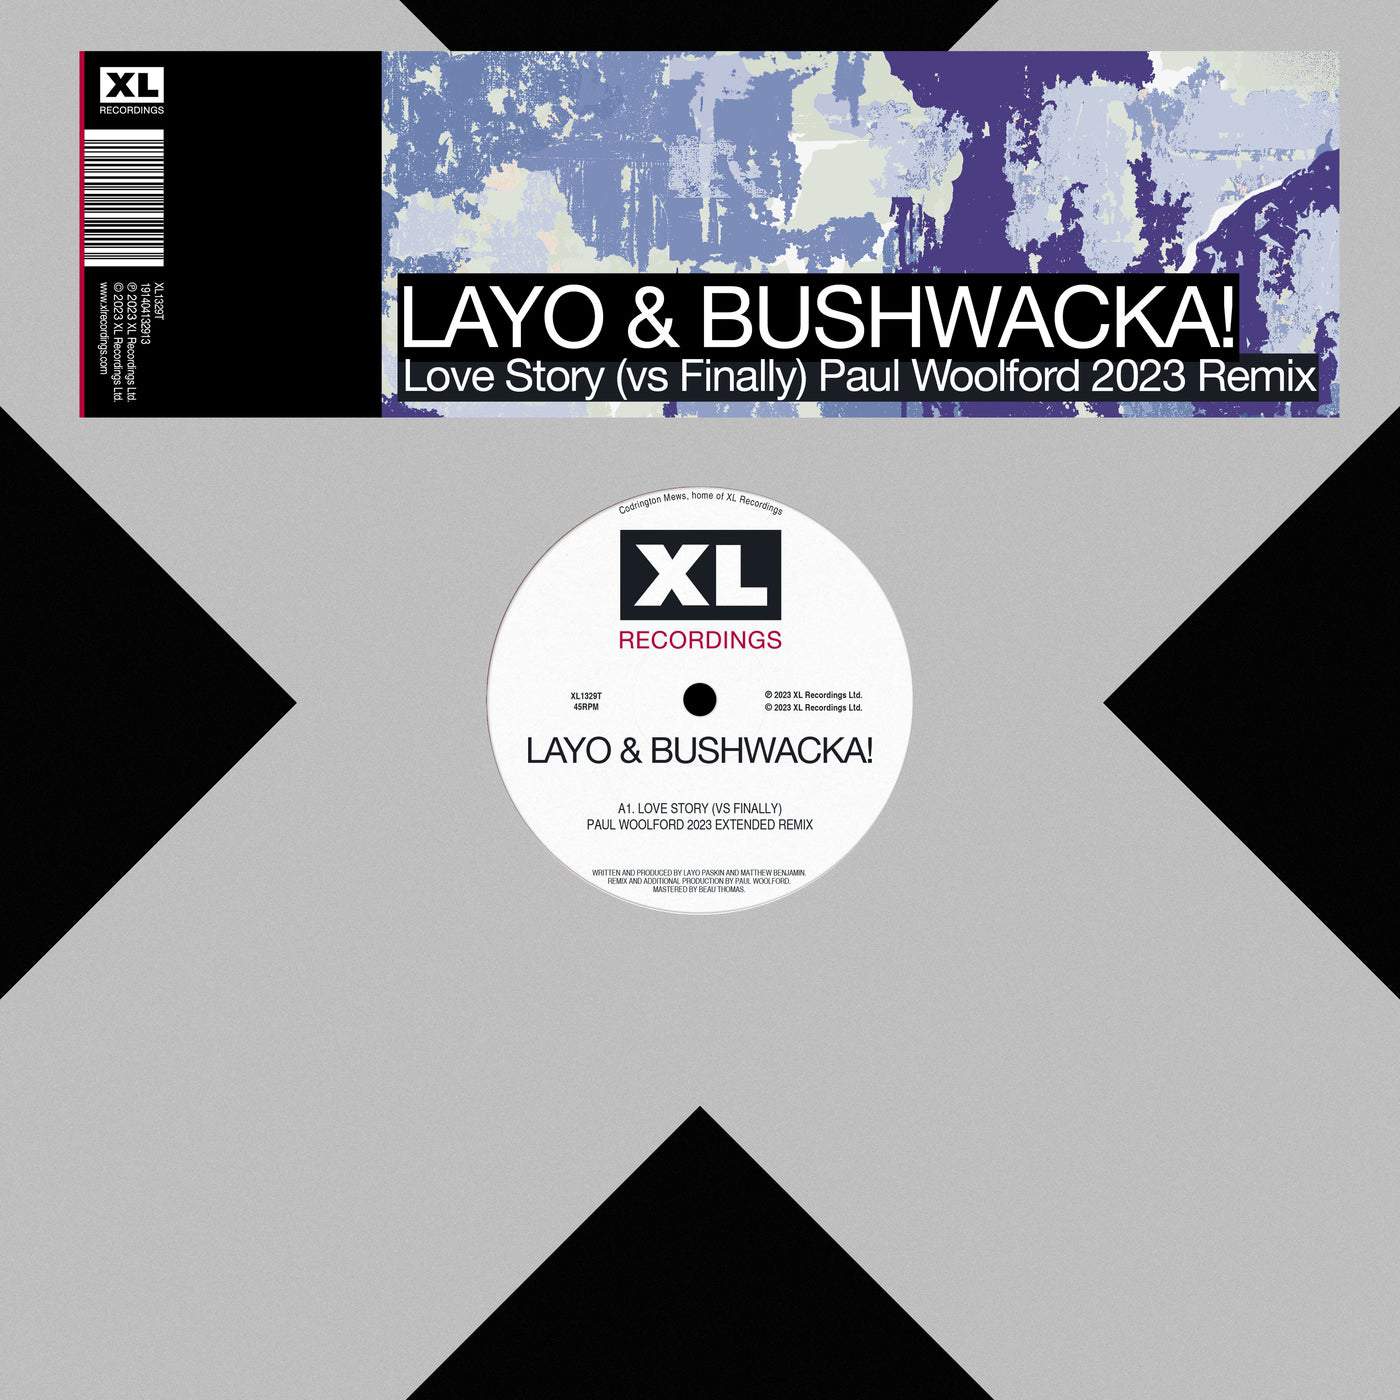 image cover: Layo & Bushwacka!, Paul Woolford - Love Story (vs Finally) - Paul Woolford 2023 Extended Remix / XL1329DSE2